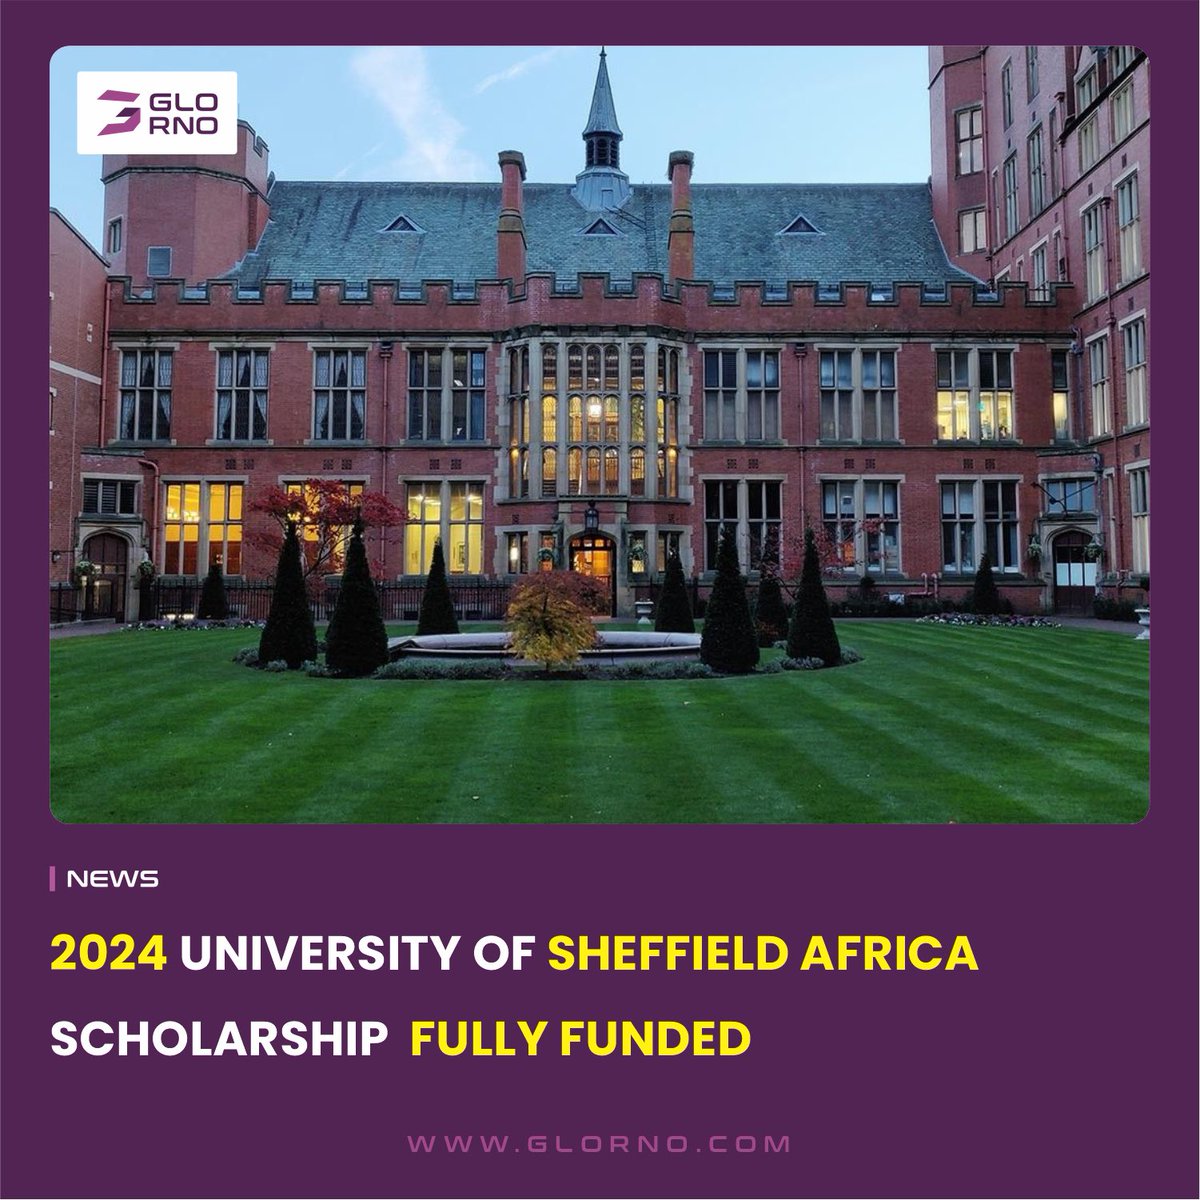 Opportunity knocks! The 2024 University of Sheffield Africa Scholarship is fully funded. Stay tuned for details on how to pursue your academic dreams in the UK! glorno.com/index.php/2024…

#SheffieldAfricaScholarship #FullyFunded #StudyAbroad